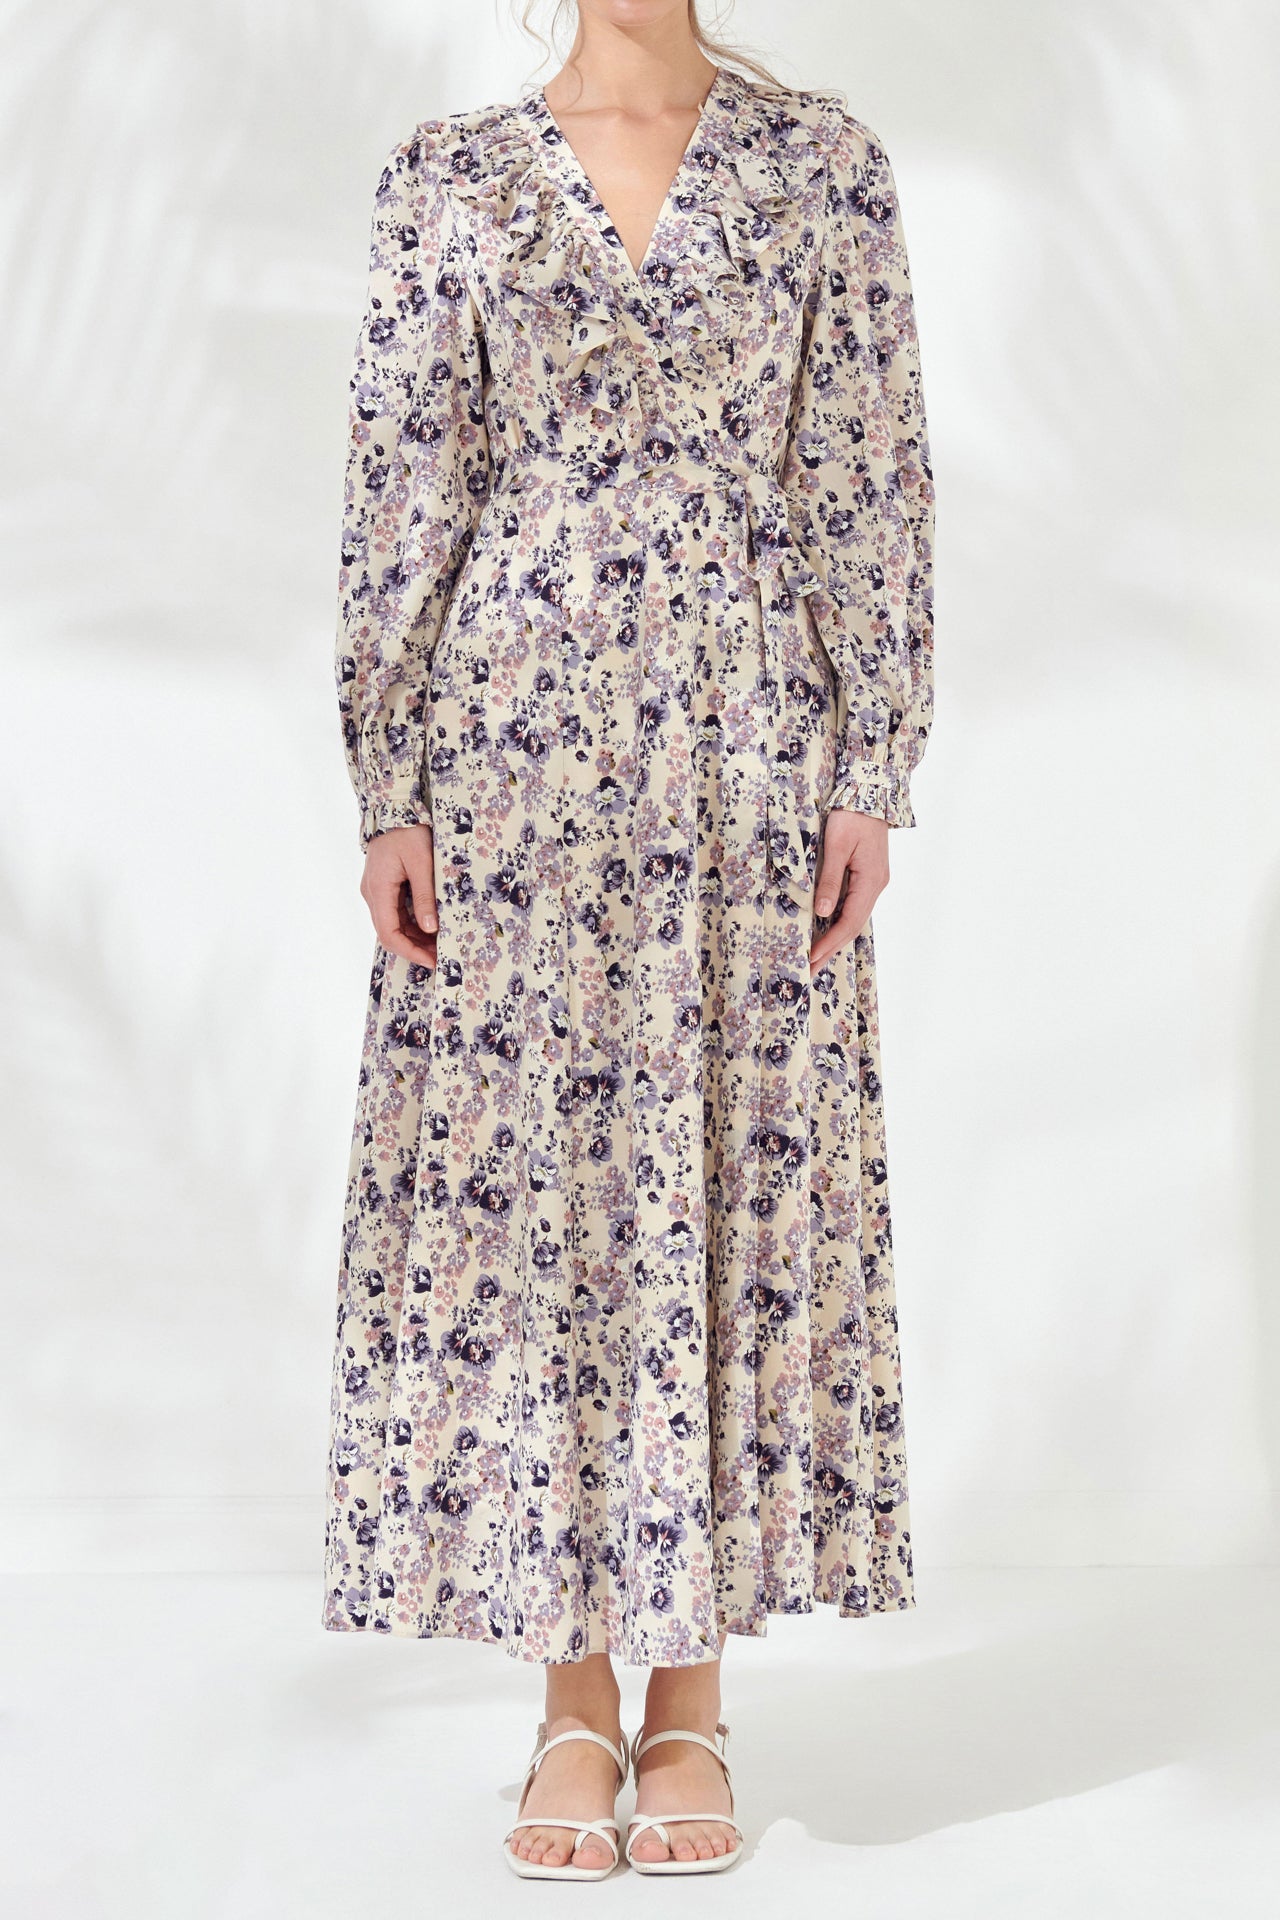 Endless Rose - Wrap Style Maxi Dress - Dresses in Women's Clothing available at endlessrose.com